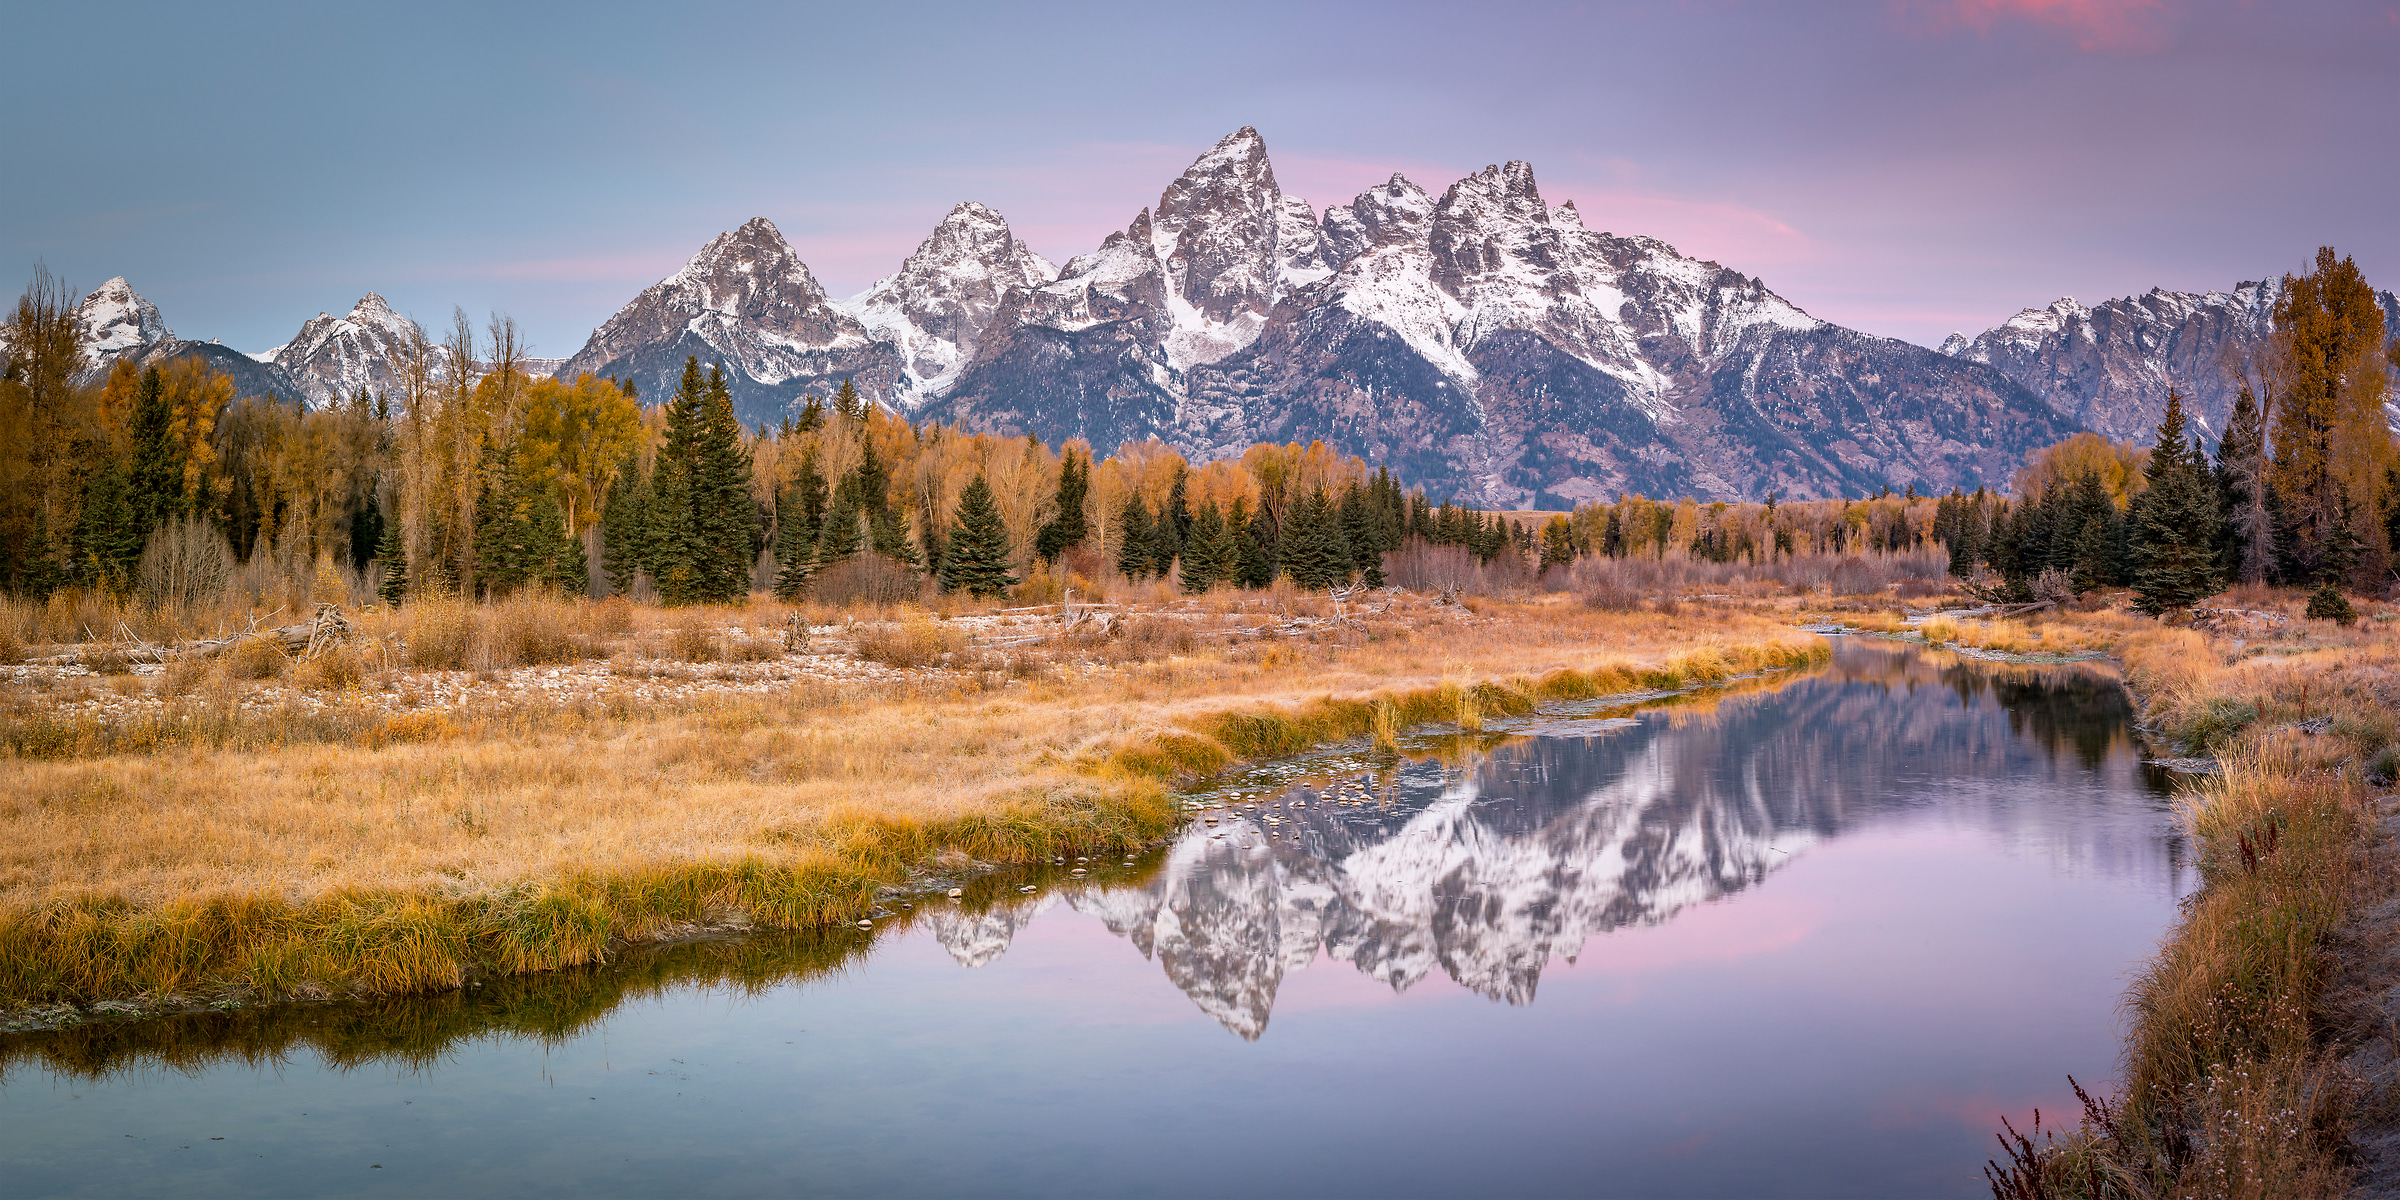 266 megapixels! A very high resolution, large-format VAST photo print of a mountain landscape scene at dawn with the Grand Tetons, a river, and a forest with autumn foliage; landscape photo created by Justin Katz in Grand Teton National Park, Wyoming.